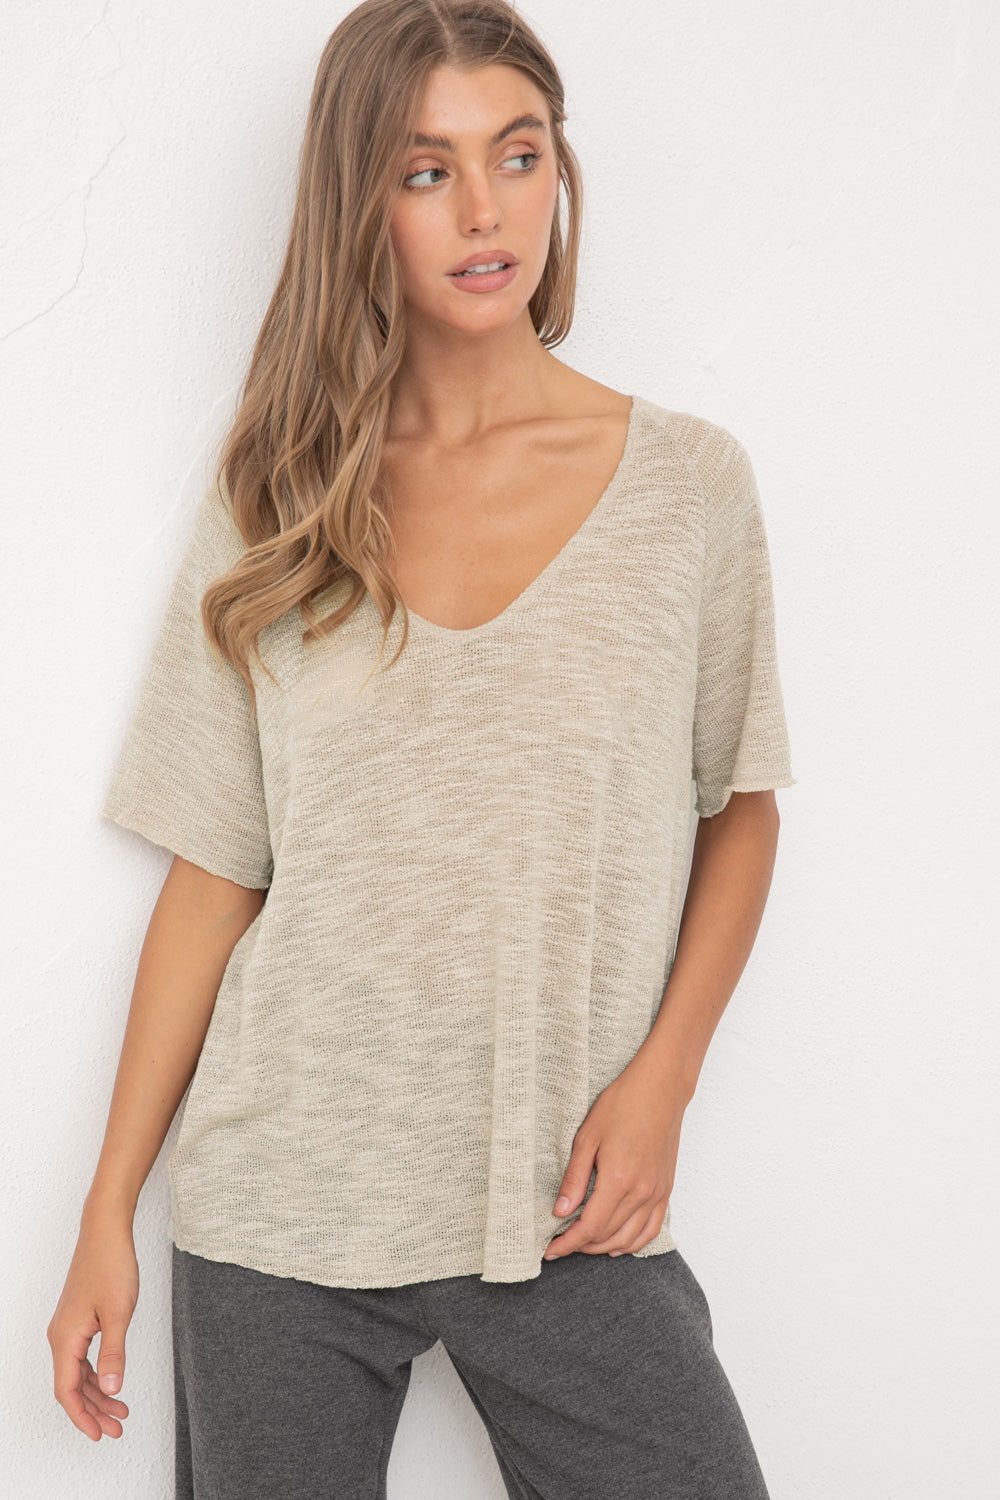 Beige Slubby V Neck Top, Tops by Wasabi and Mint | LIT Boutique